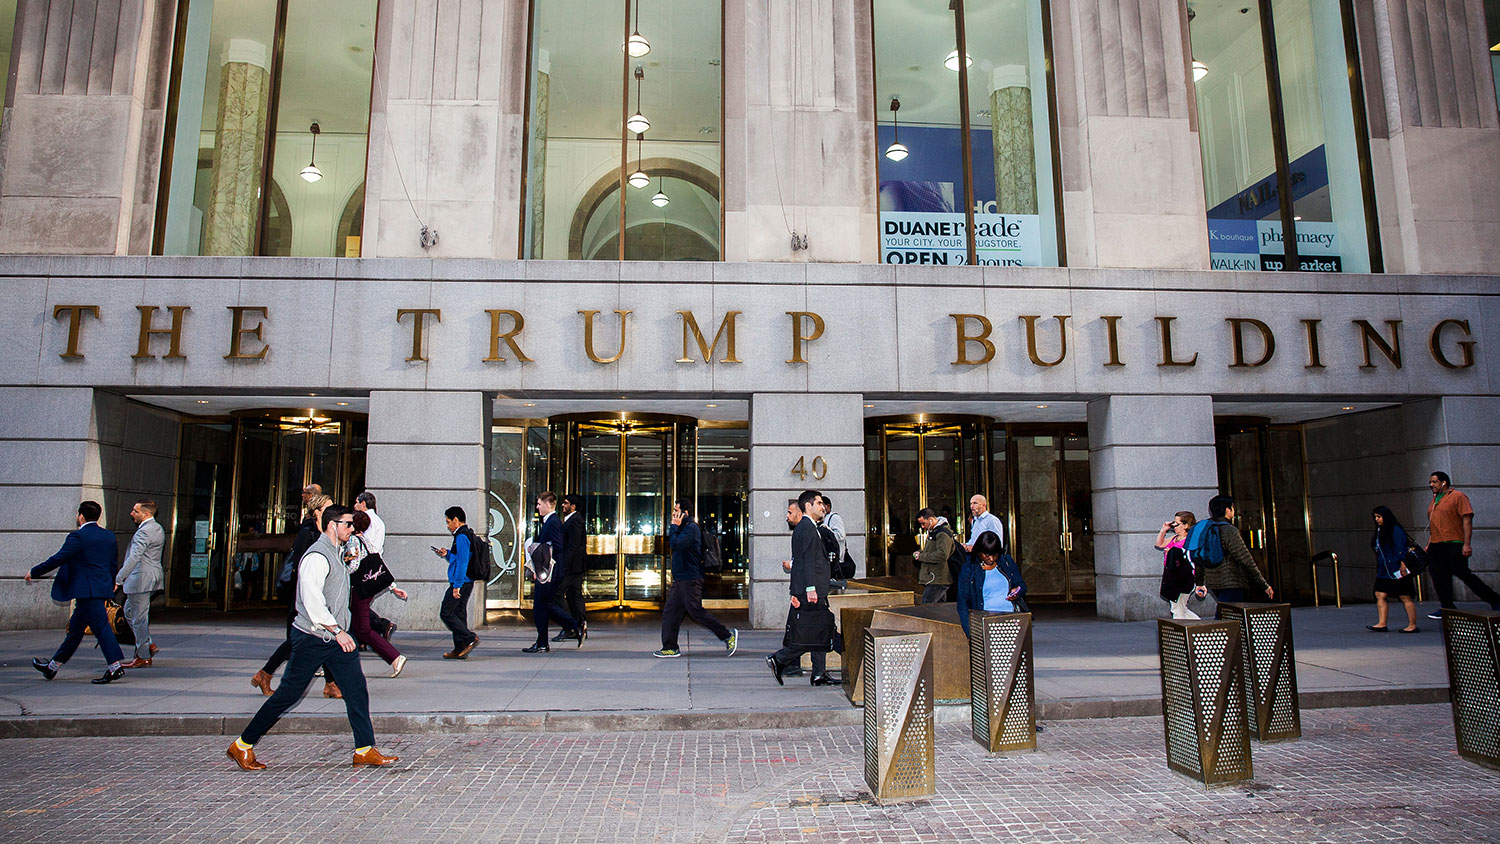 Pedestrians walk past the Trump Building on Wall Street in New York on April 18, 2016.
